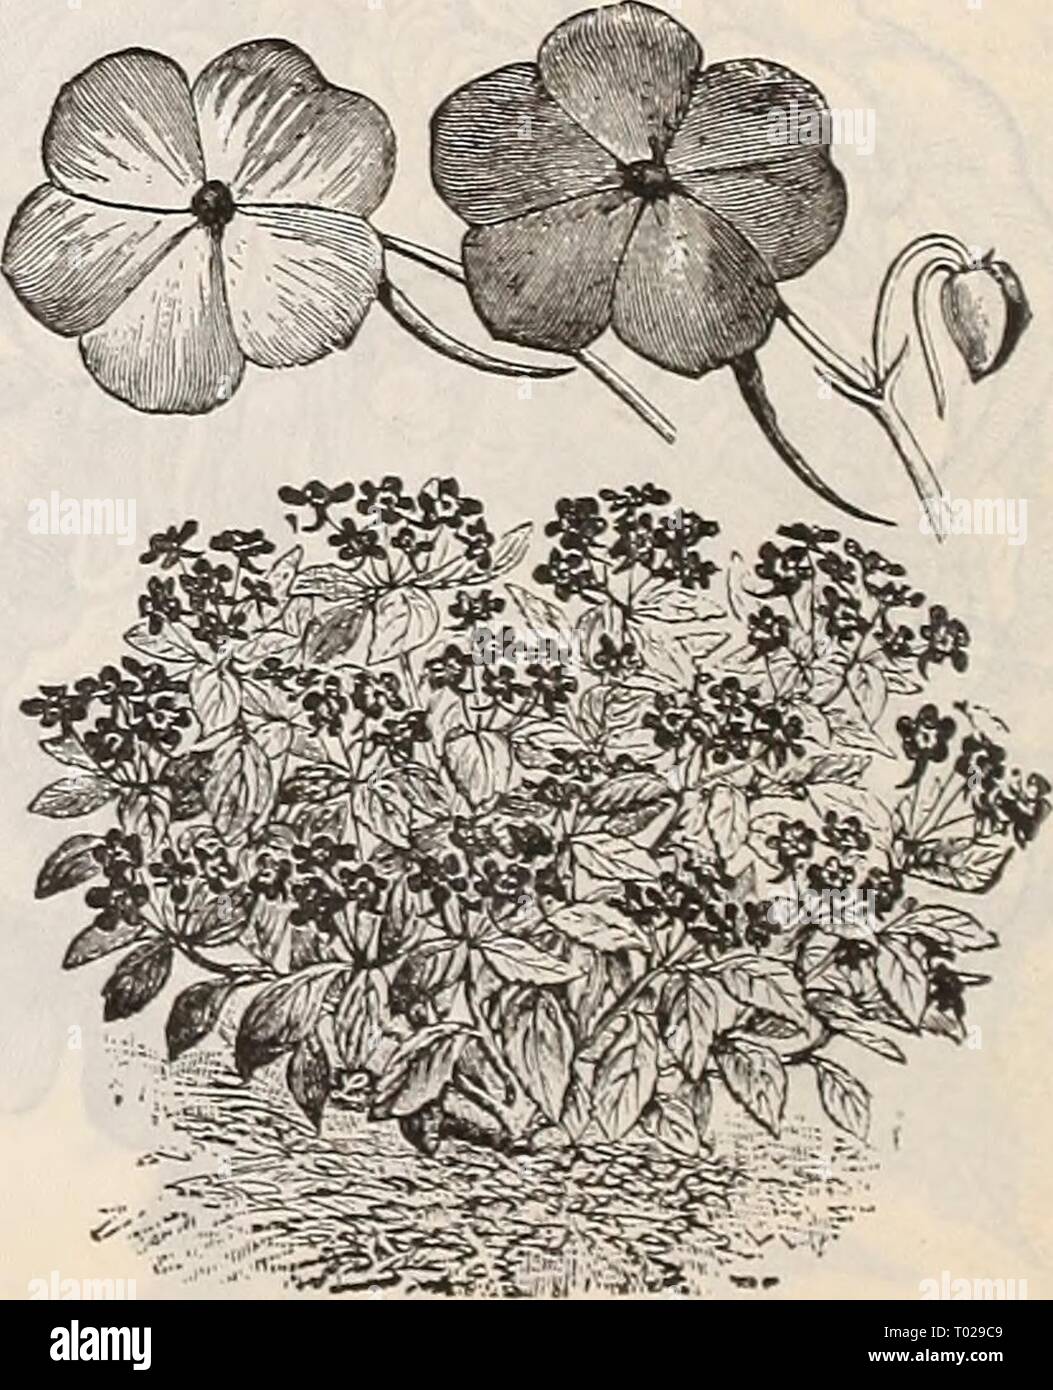 Dreer's garden calendar : 1900 . dreersgardencale1900henr Year: 1900  wik; HuMULVs Japonmcus Vakif.gatus. Hyacinth r Veilow Tulip Poppv. HONESTY. Moon wort. 1 Hardy biennial, admired for its silvery seed pouches, which are used for house ornaments^ as they present a beautiful and rather curious appearance. per pkt. 2801 Honesty {Lunaria Biennis). 2 feet. ... f&gt; ICE PLANT. (3Iesembr}antlienium ) 2831 Dwarf growing plr.nt bearing small white flowers. Prized for its singular icy foliage 5 IRIS. (Fleur-de-lis.) 2890 Hardy perennial, tuberous-rooted gar- den plant, growing about two feet high, w Stock Photo